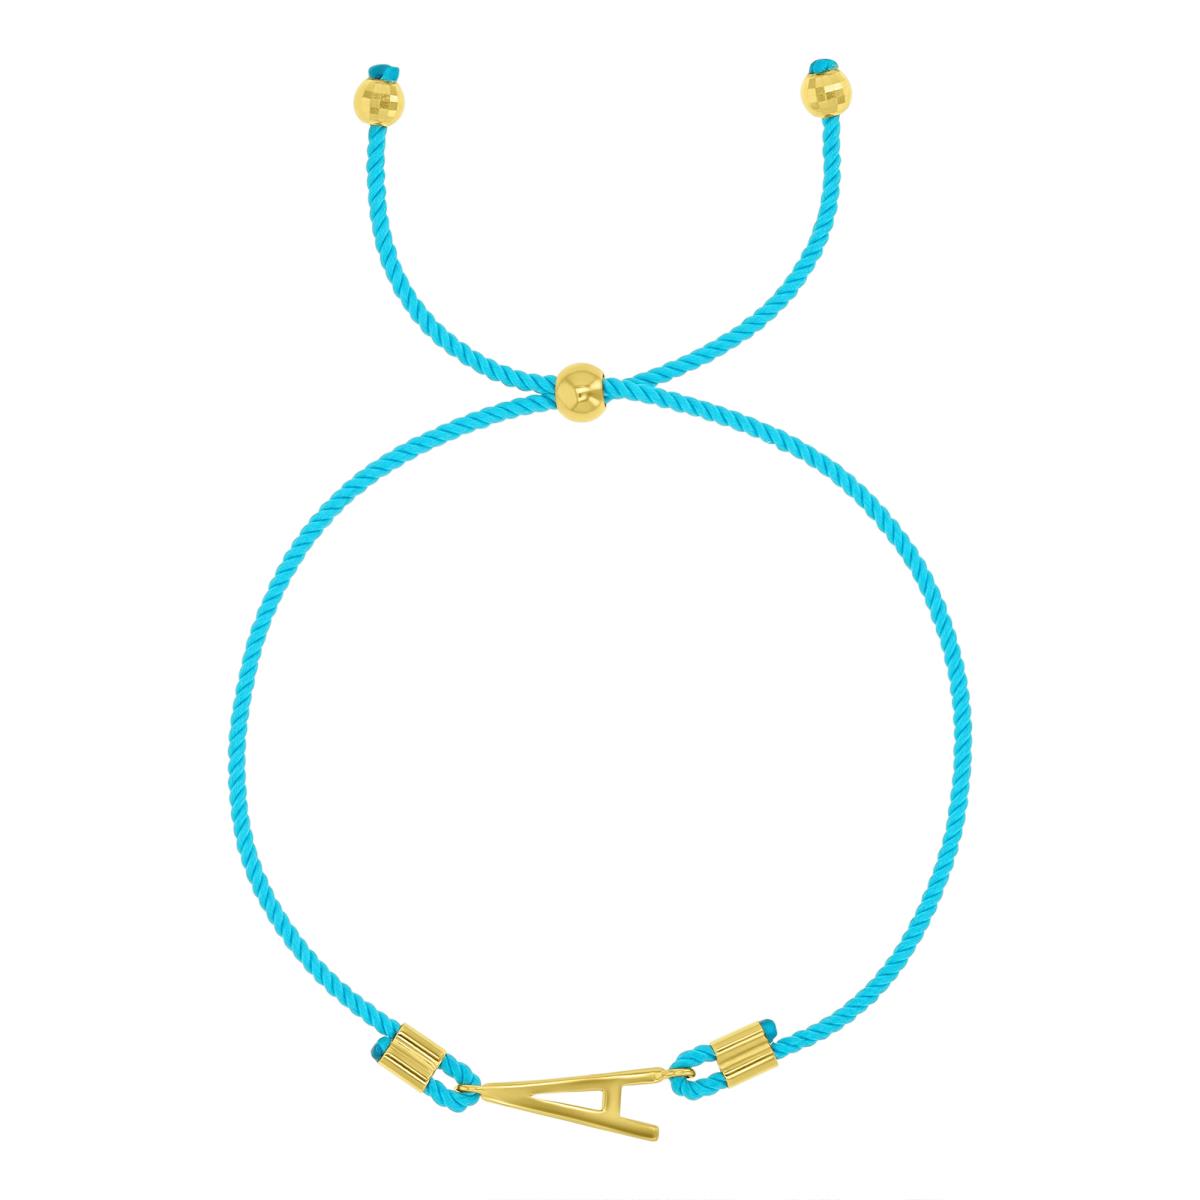 14K Yellow Gold Braided Turquoise Adjustable "A" Initial 9.25" Bracelet